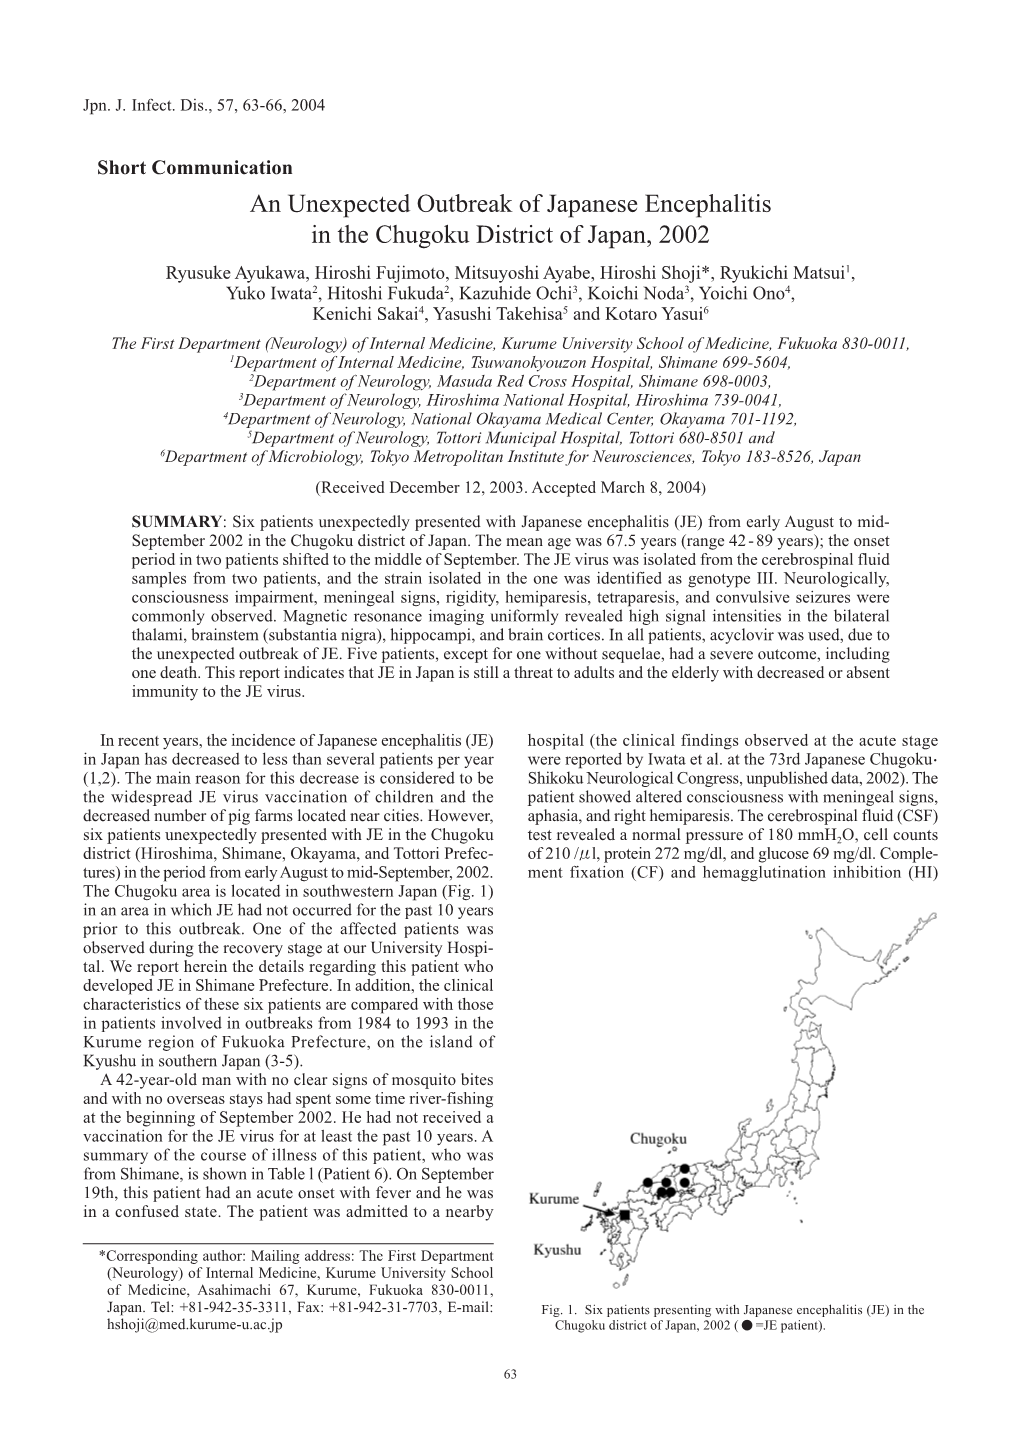 An Unexpected Outbreak of Japanese Encephalitis in the Chugoku District of Japan, 2002